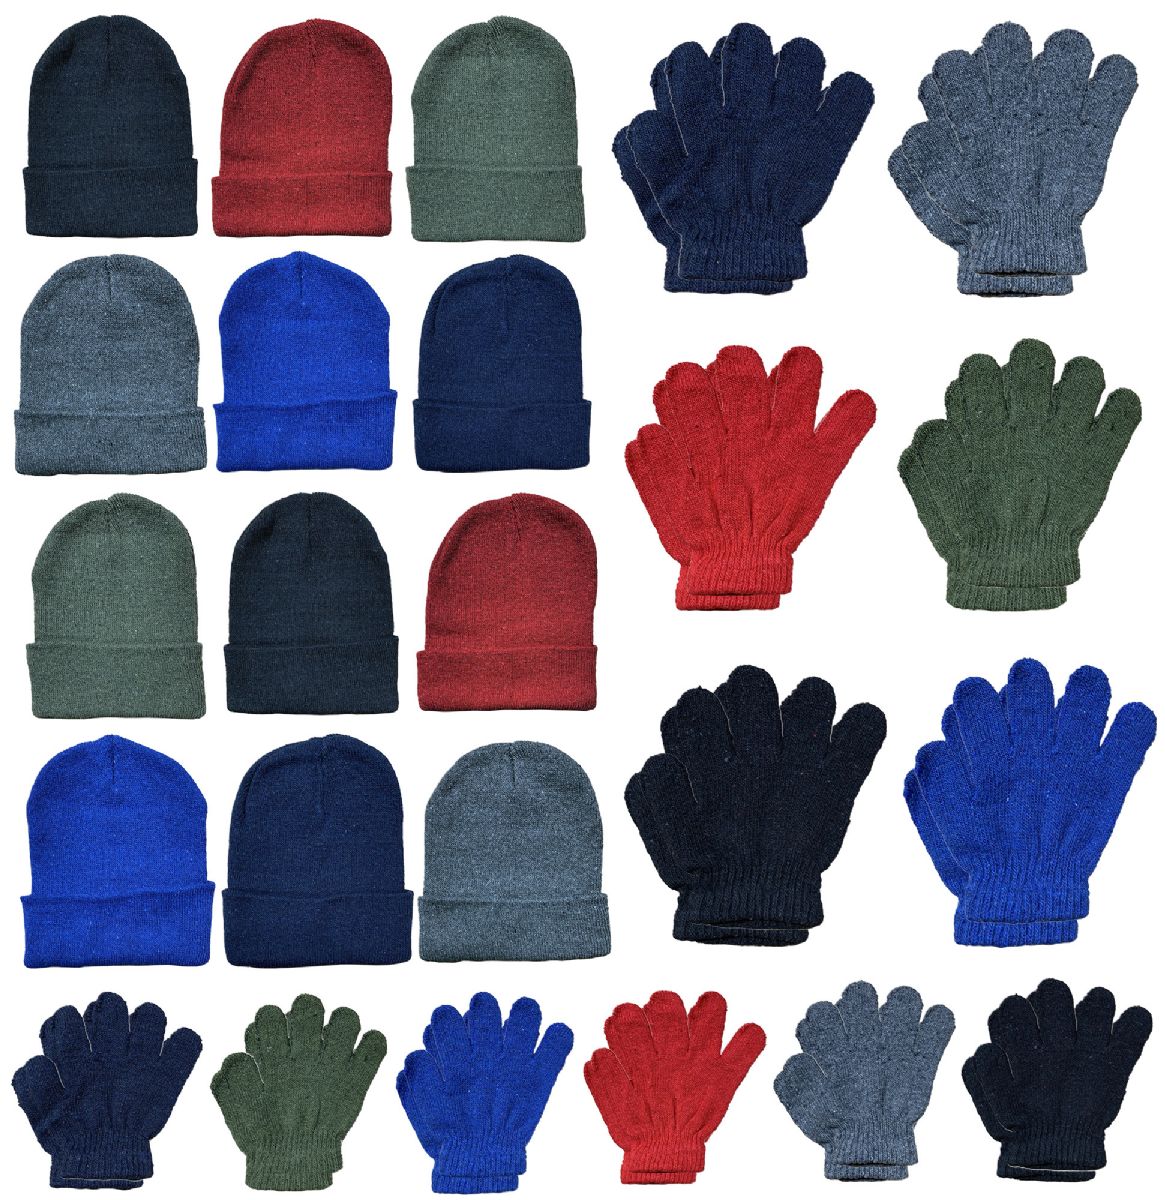 12 Pieces of Yacht & Smith Kid's Assorted Colored Winter Beanies & Gloves Set